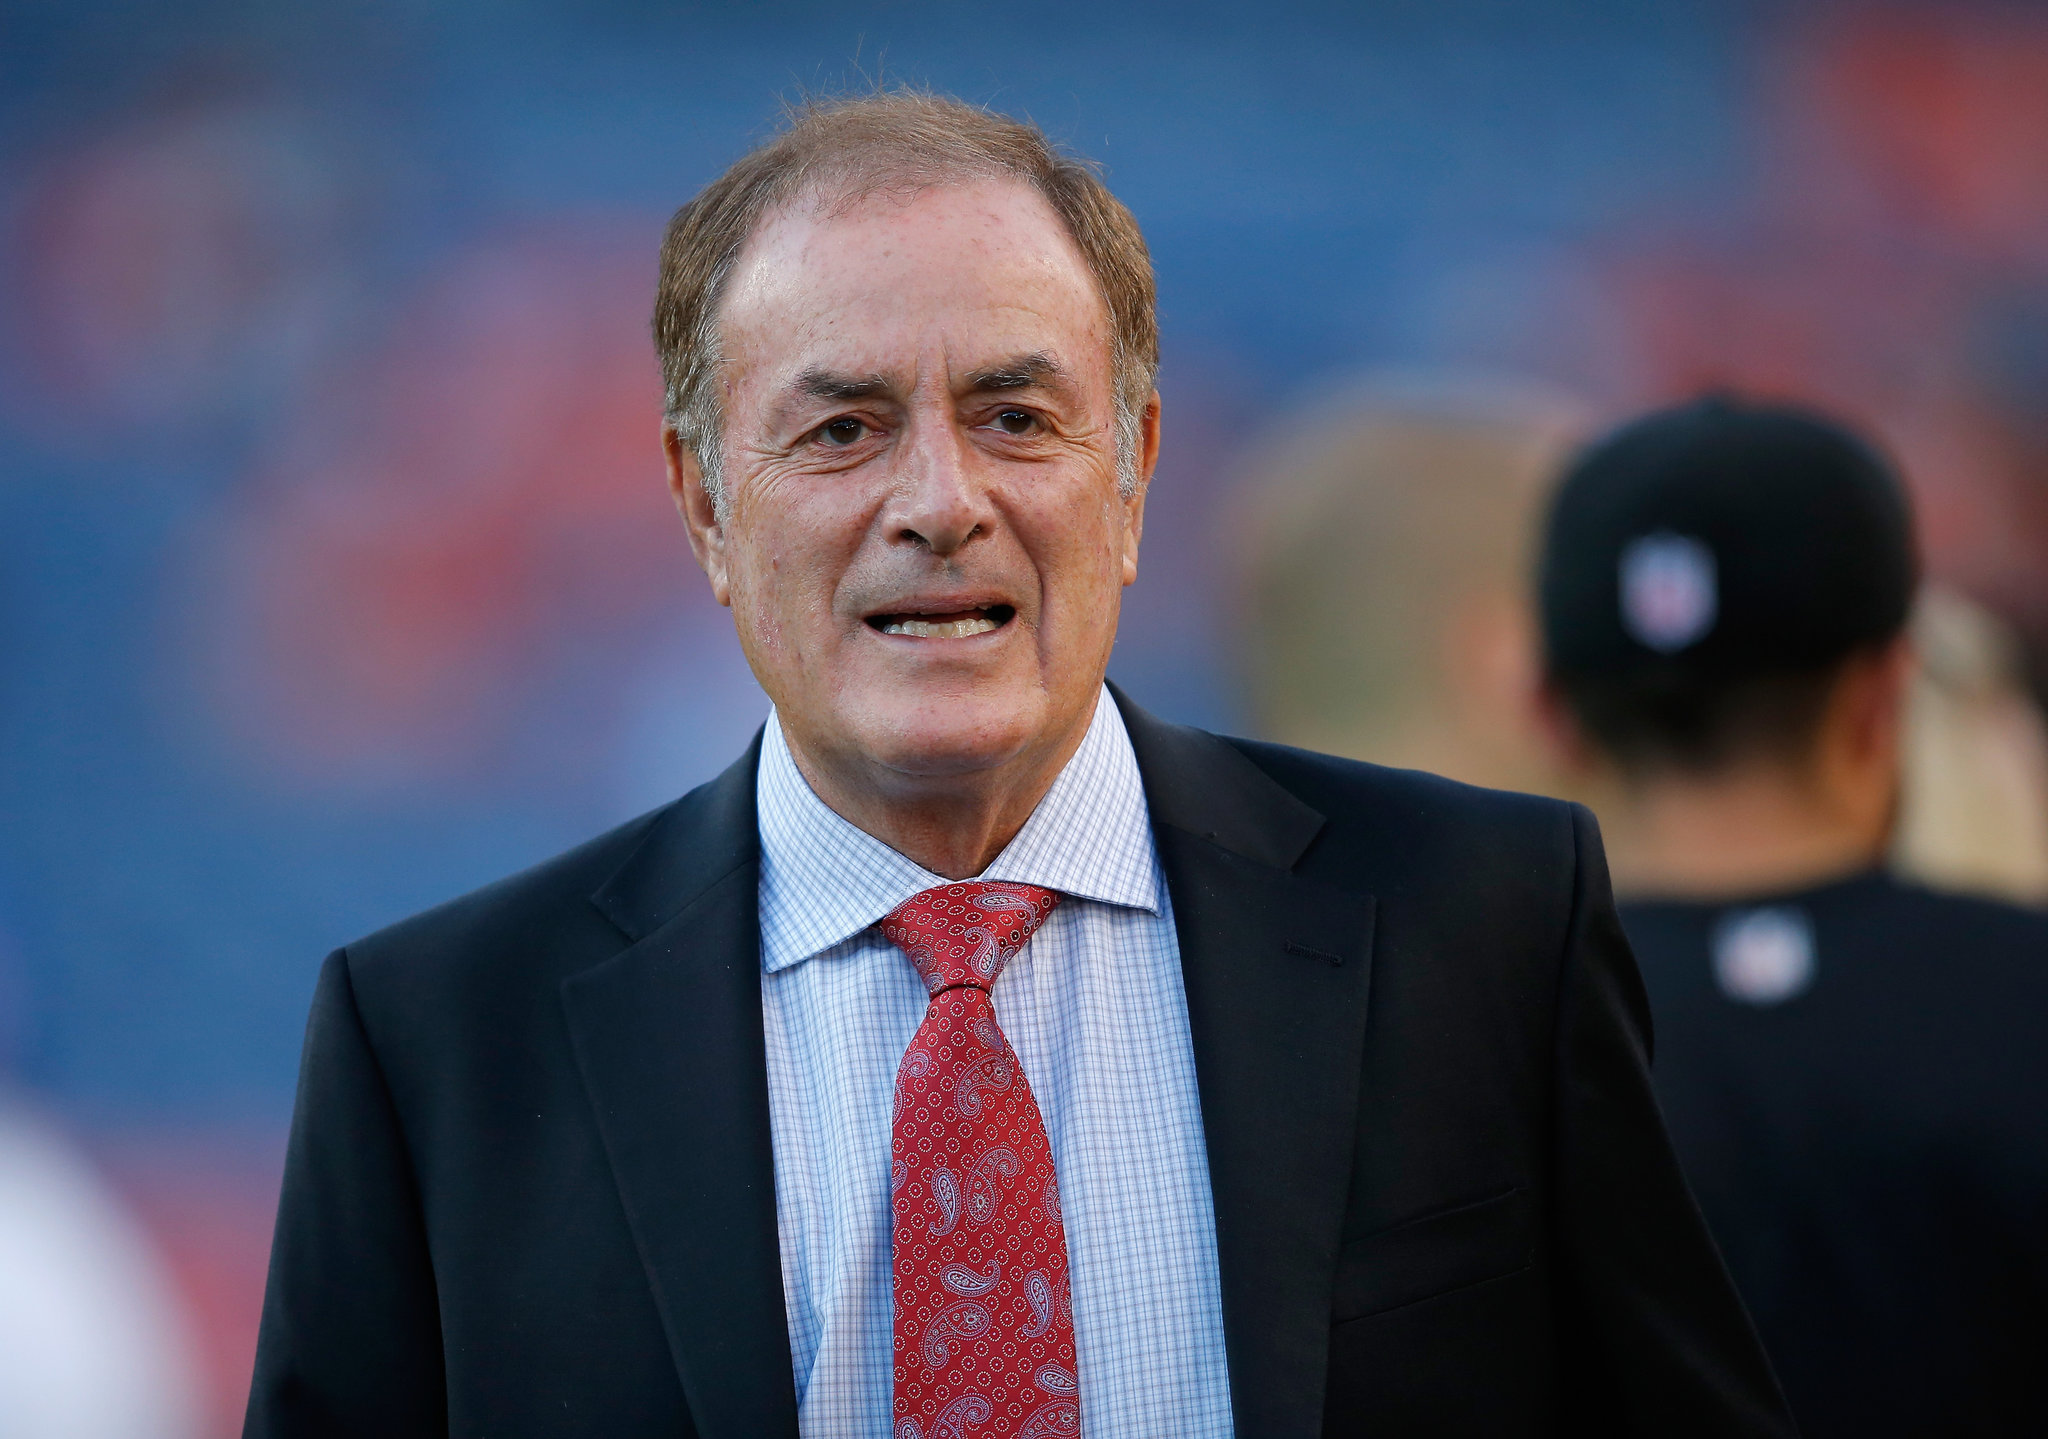 Happy Birthday to Al Michaels! He used to call games on TV but I kind of lost track of him after that. 